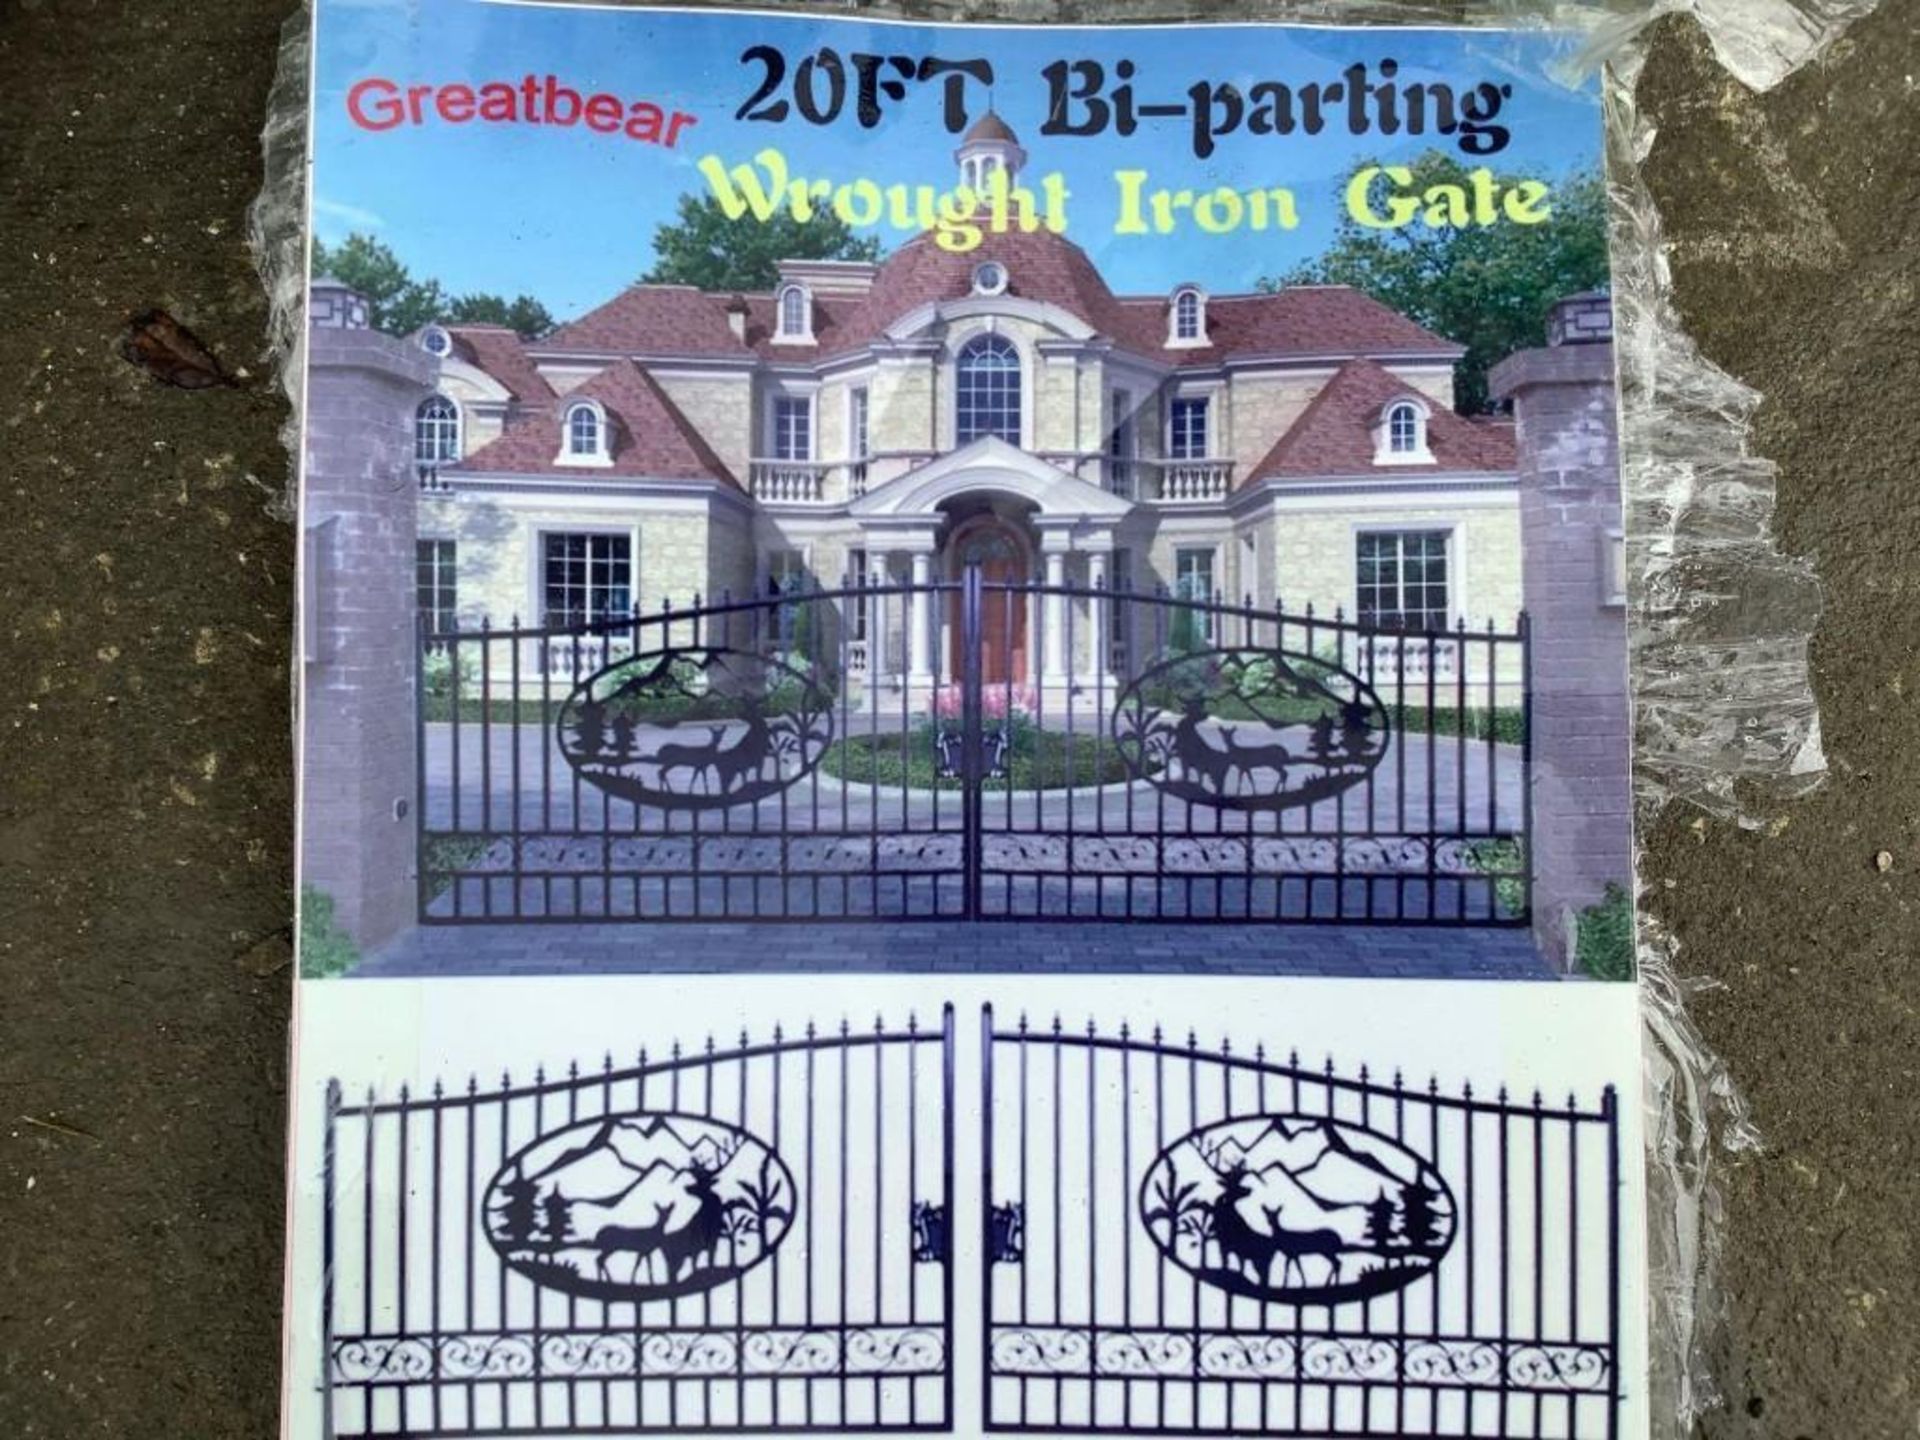 SET OF UNUSED GREAT BEAR 20FT BI PARTING WROUGHT IRON GATES, 10FT EACH PIECE (20' TOTAL WIDTH). 2 PI - Image 2 of 2